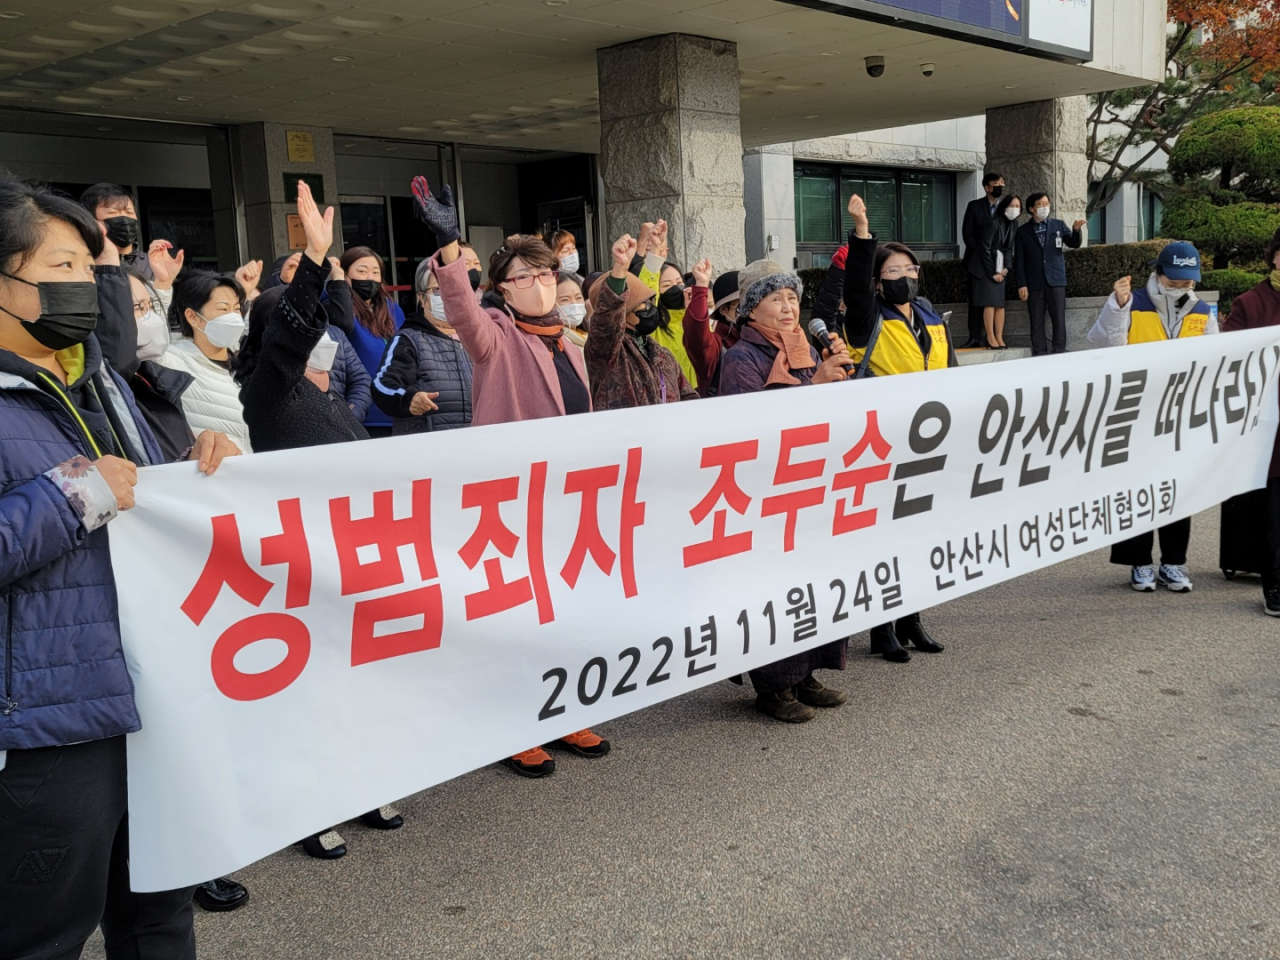 Residents and civic groups of Seonbu-dong, Ansan, Gyeonggi Province hold a protest against convicted child rapist Cho Doo-soon's move to the area in this Nov. 24 file photo. Yonhap